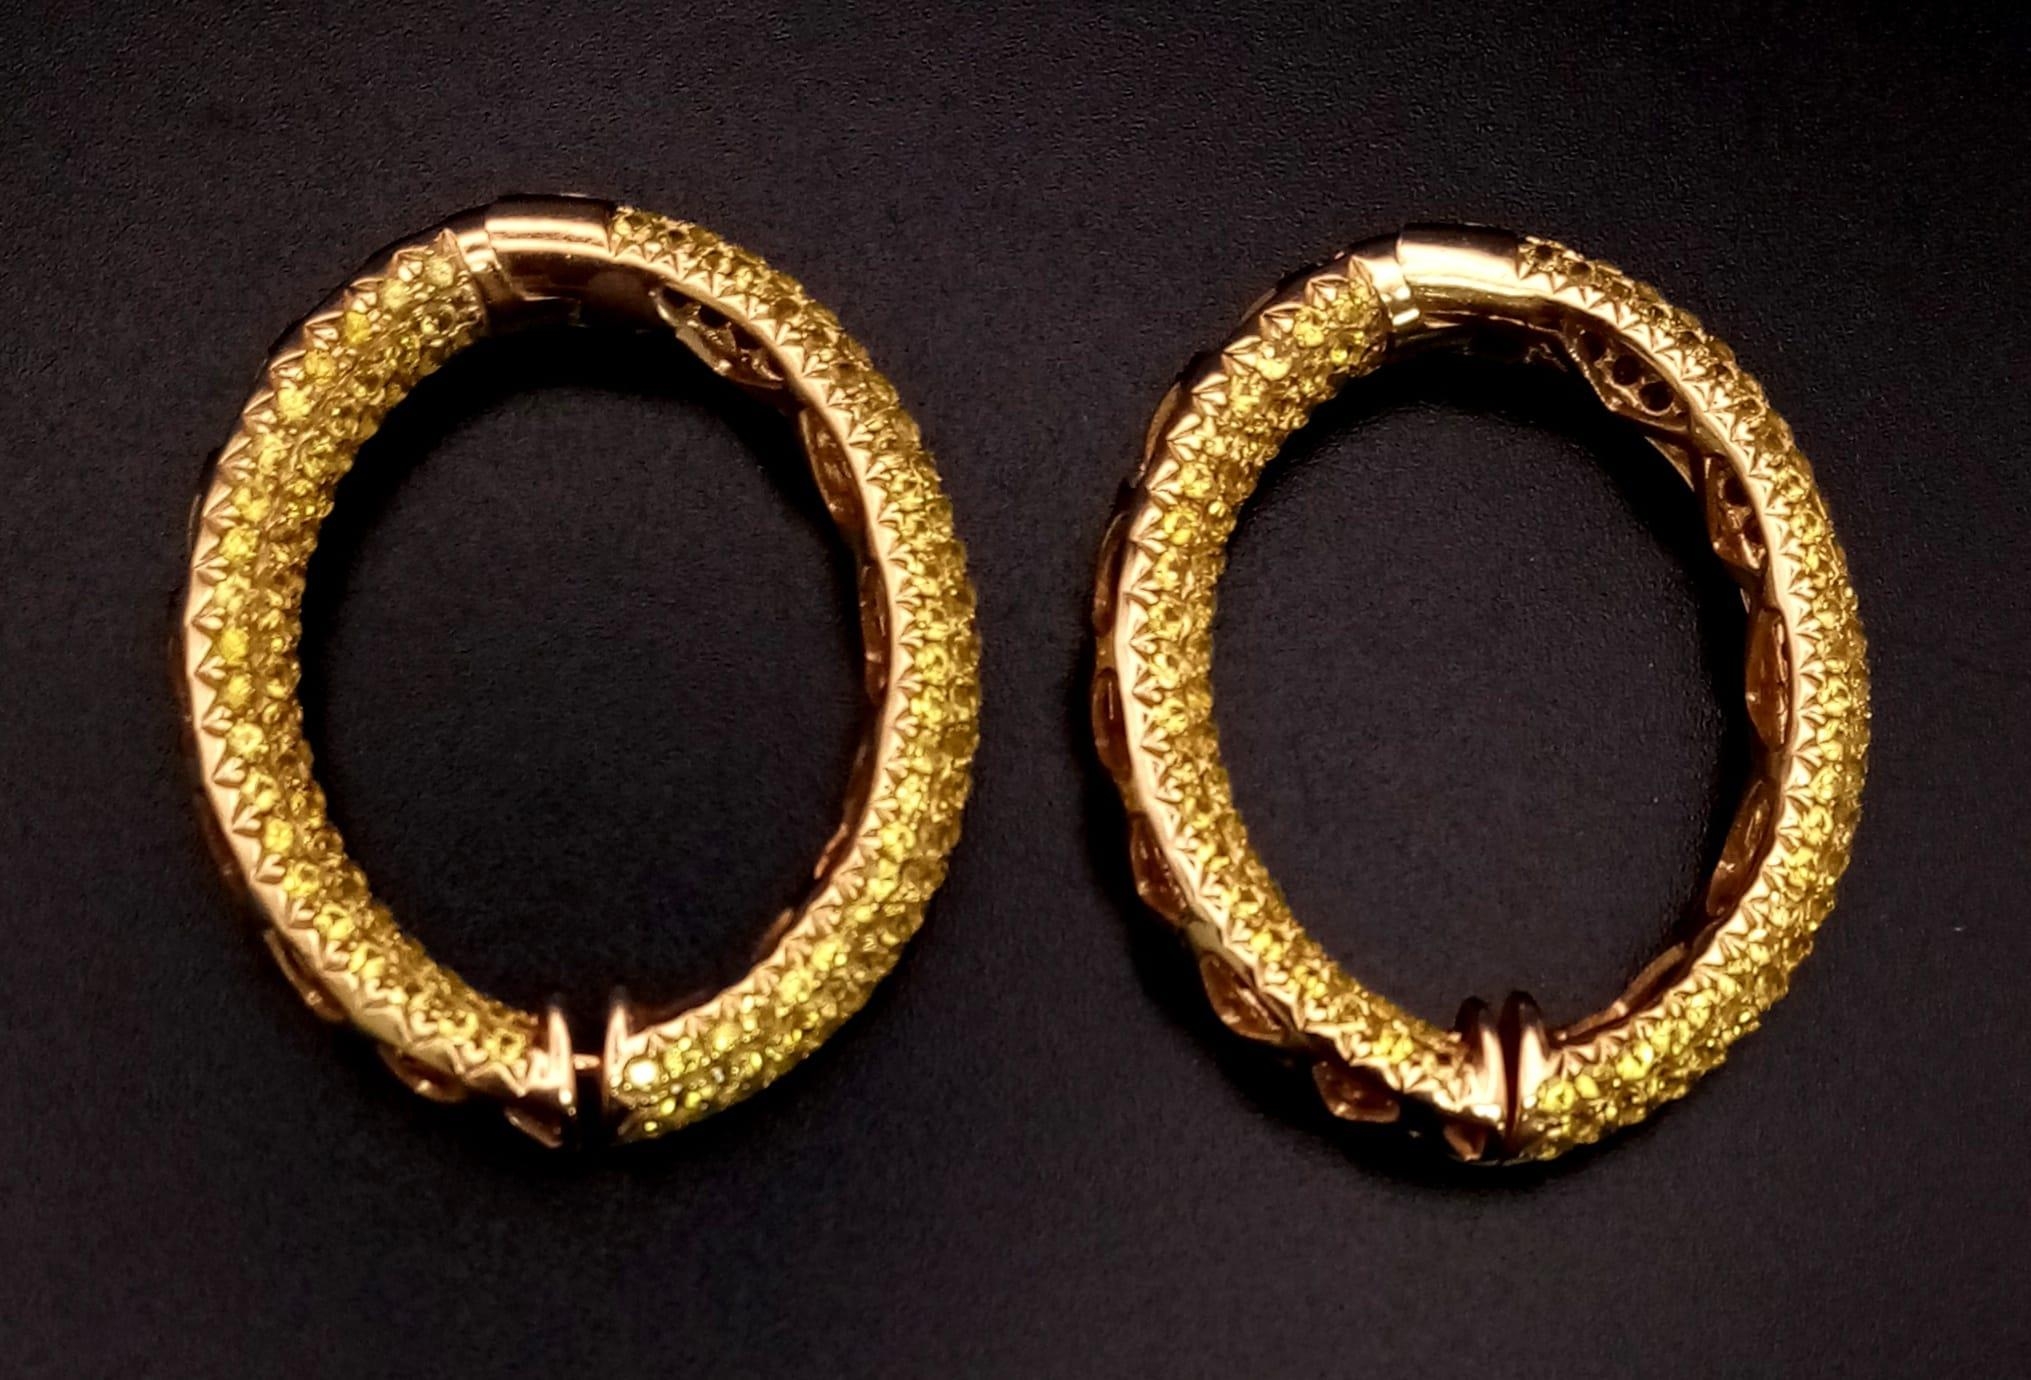 An 18K Yellow Gold and Yellow Stone Pair of Hoop Earrings. 19.16g total weight. Ref: 3710. - Bild 5 aus 8